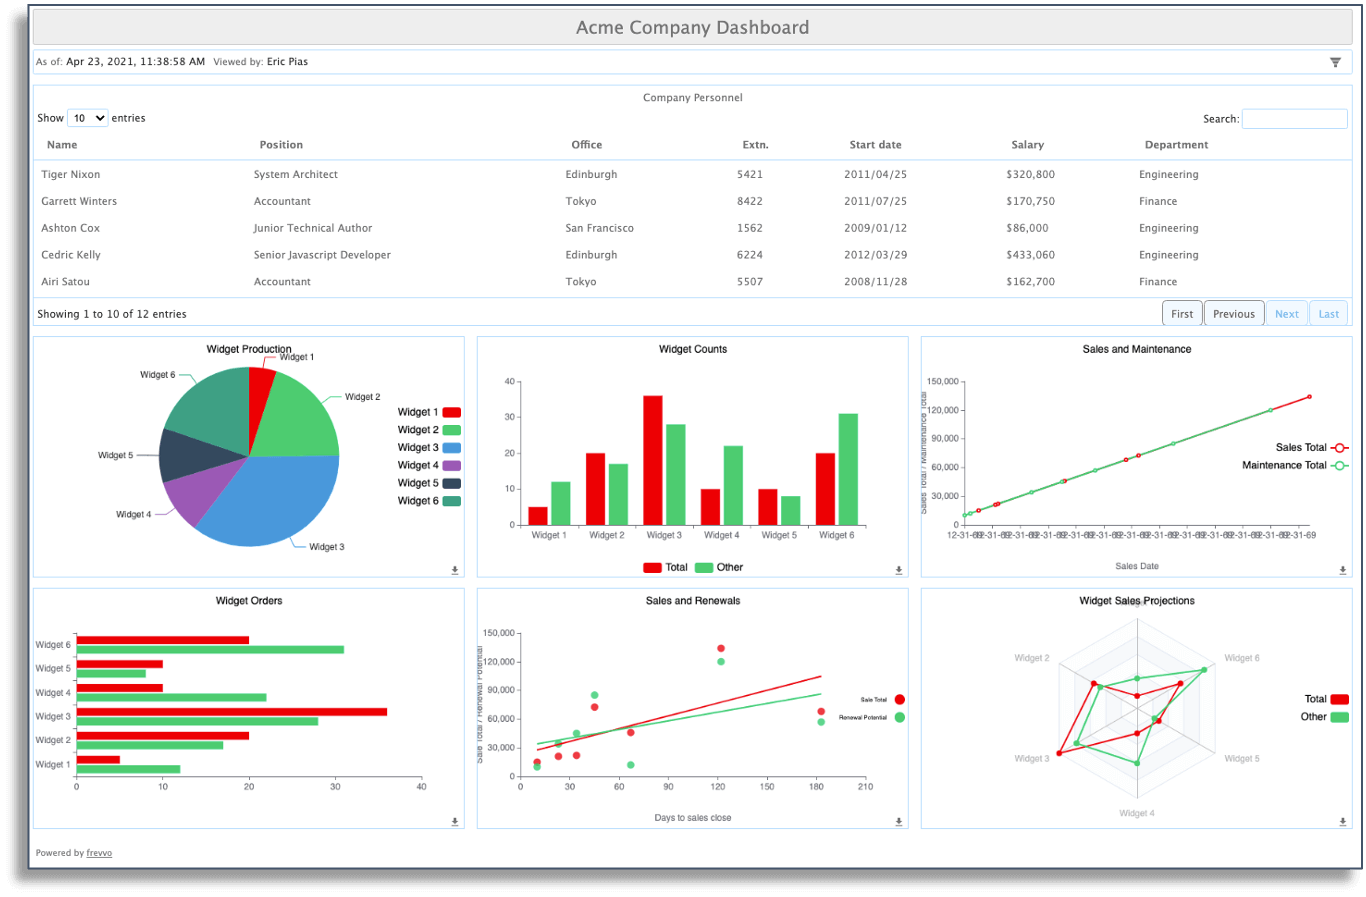 Analytics and reports in frevvo